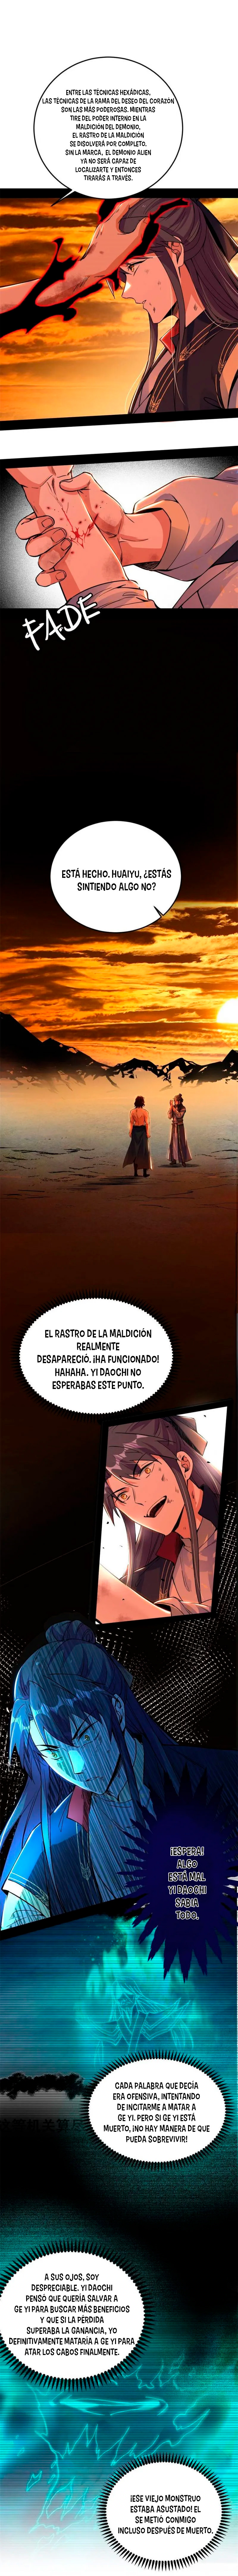 Manga Soy un dios maligno Chapter 311 image number 3